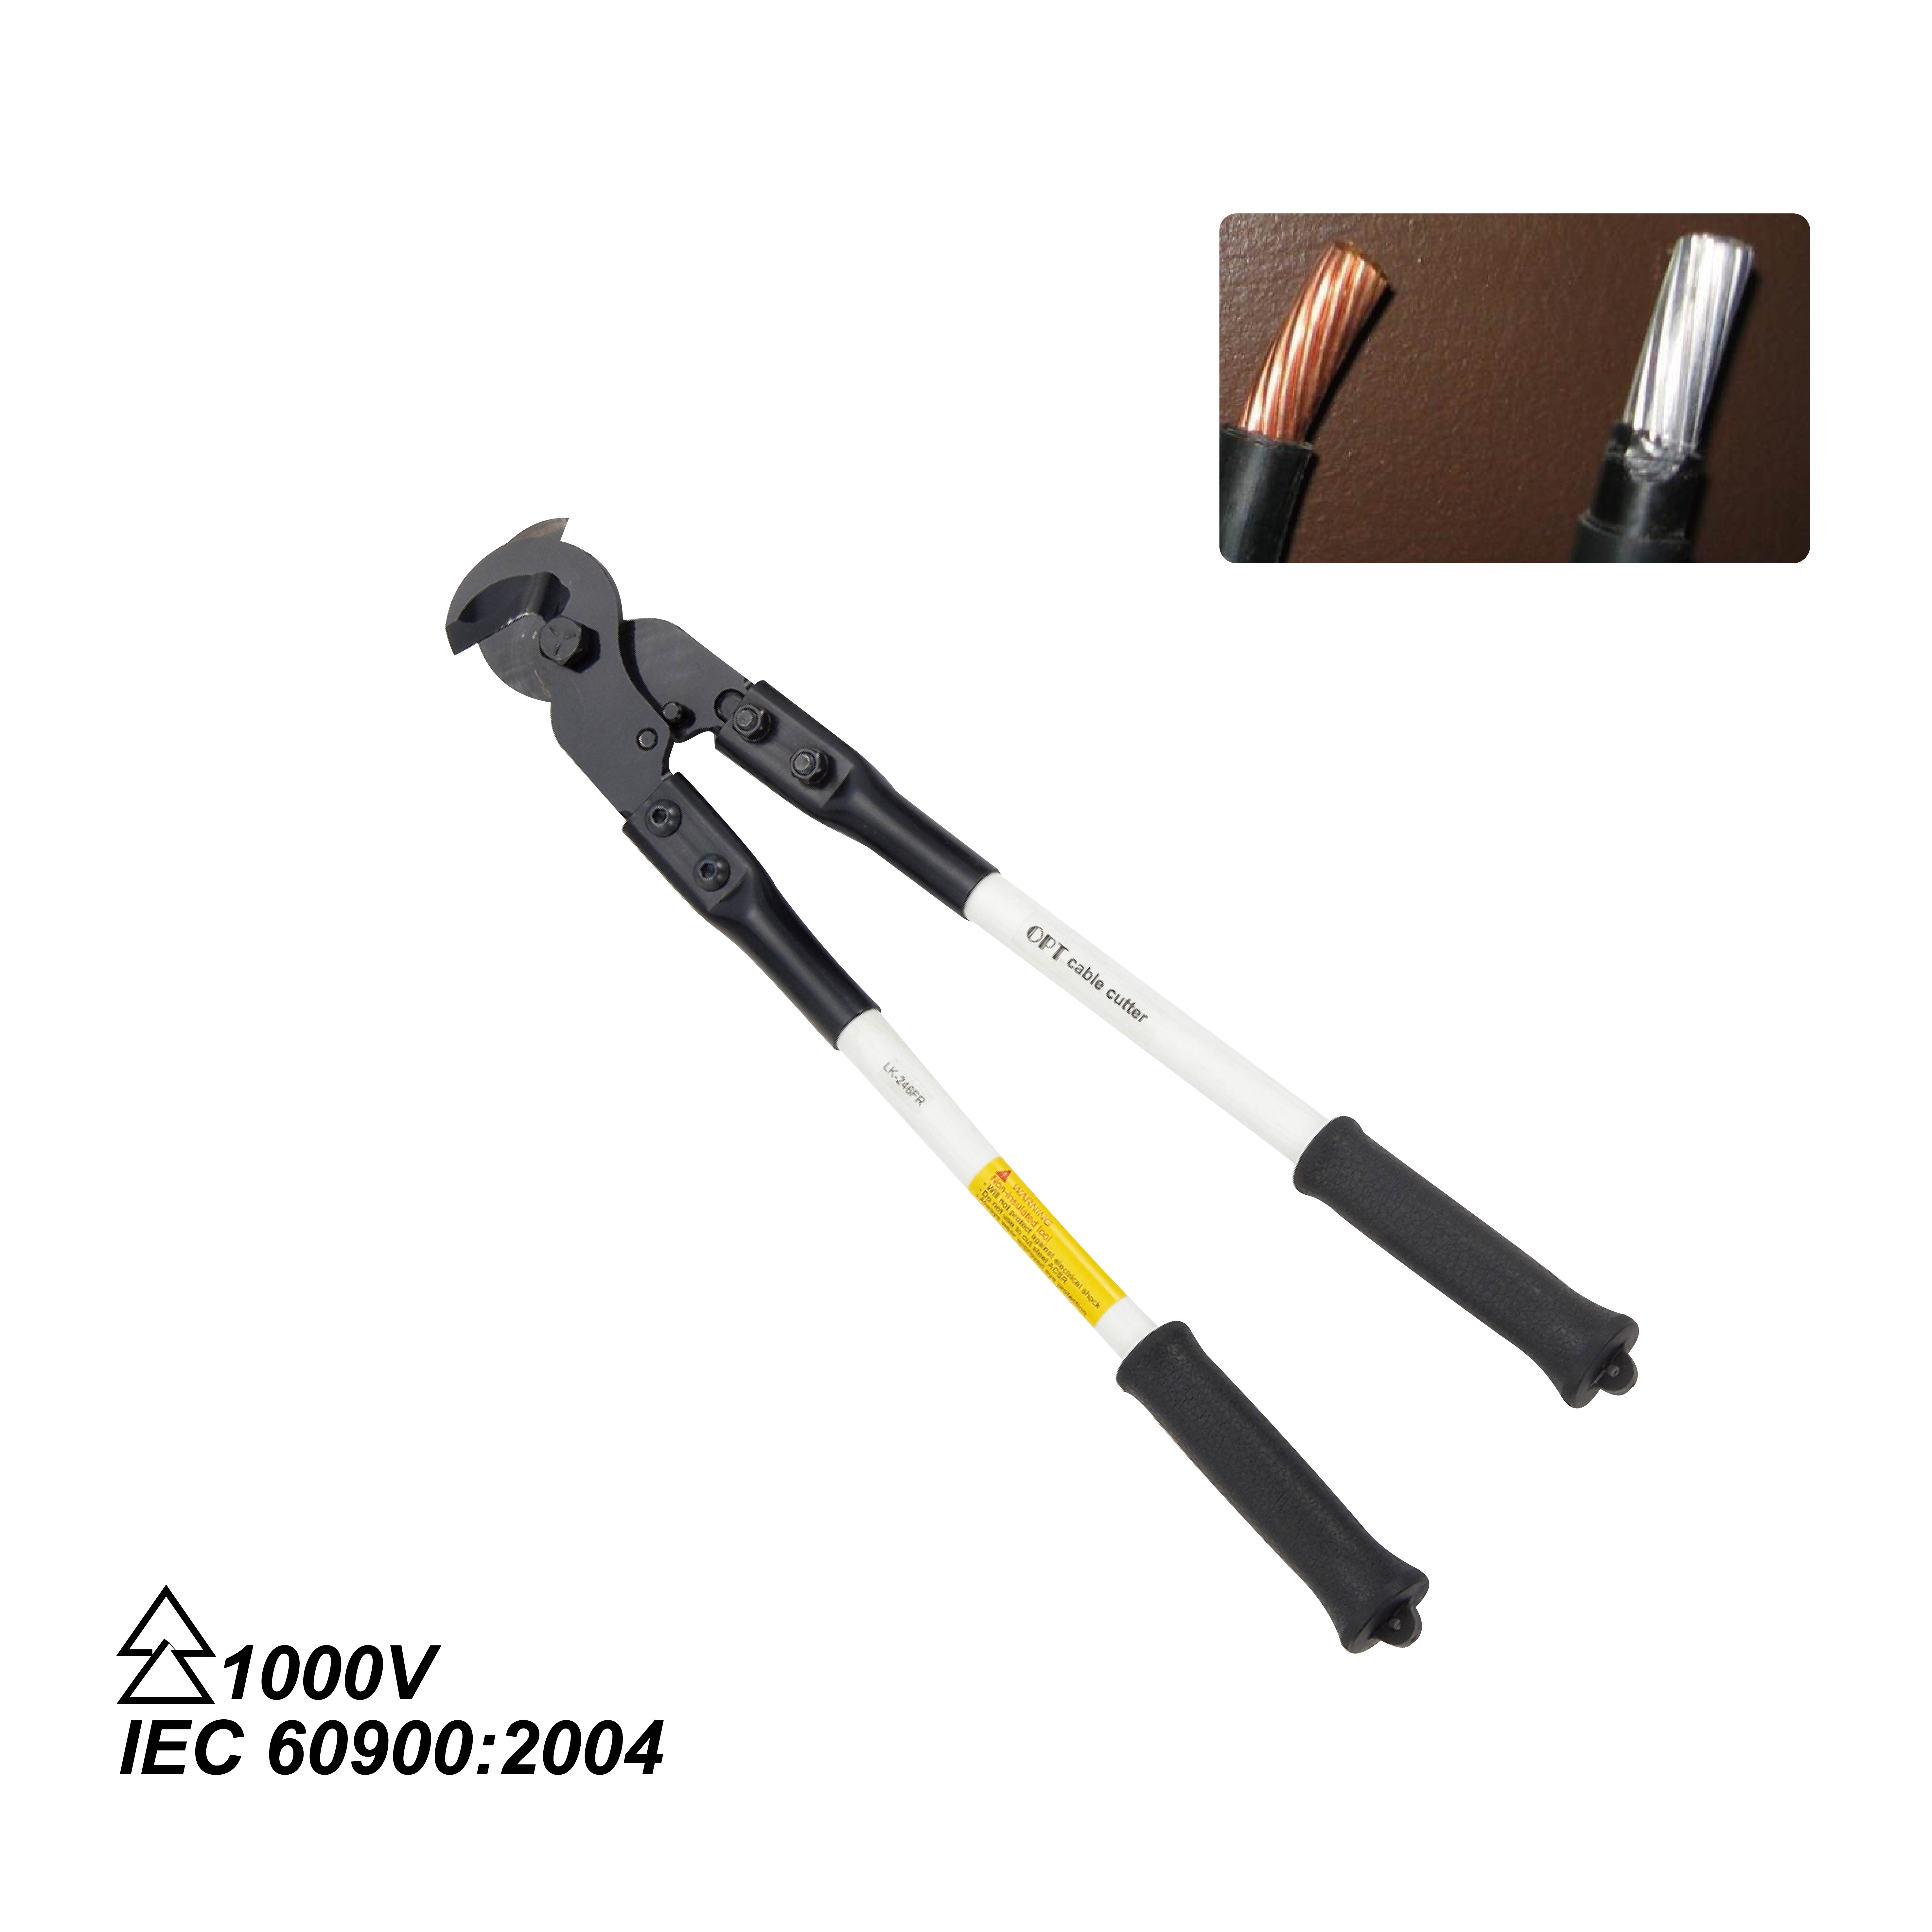 LK-246FR HAND CABLE CUTTERS